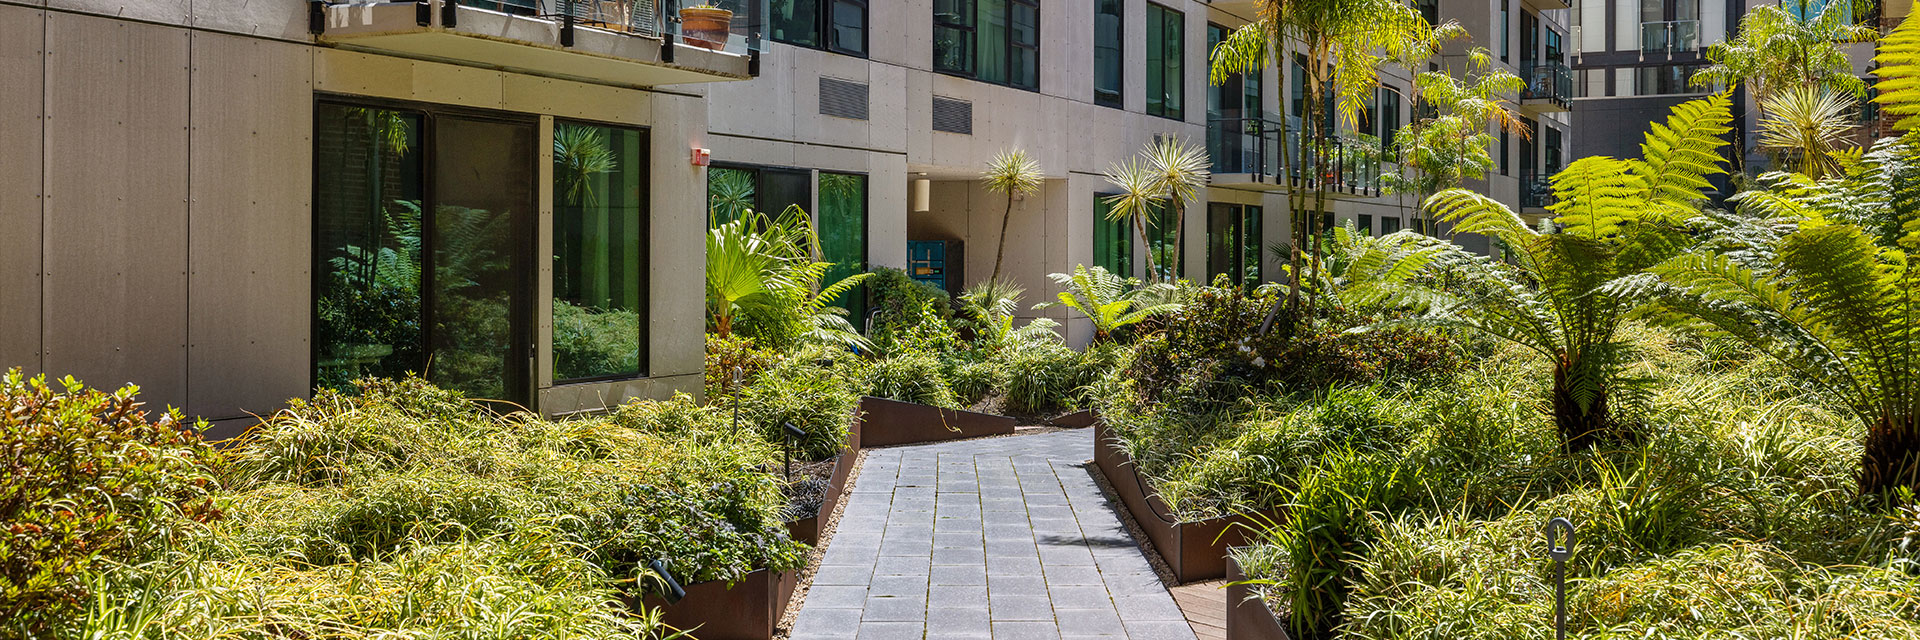 Dogpatch Apartments for Rent- Beautiful Zen Garden With Gray Tile Path